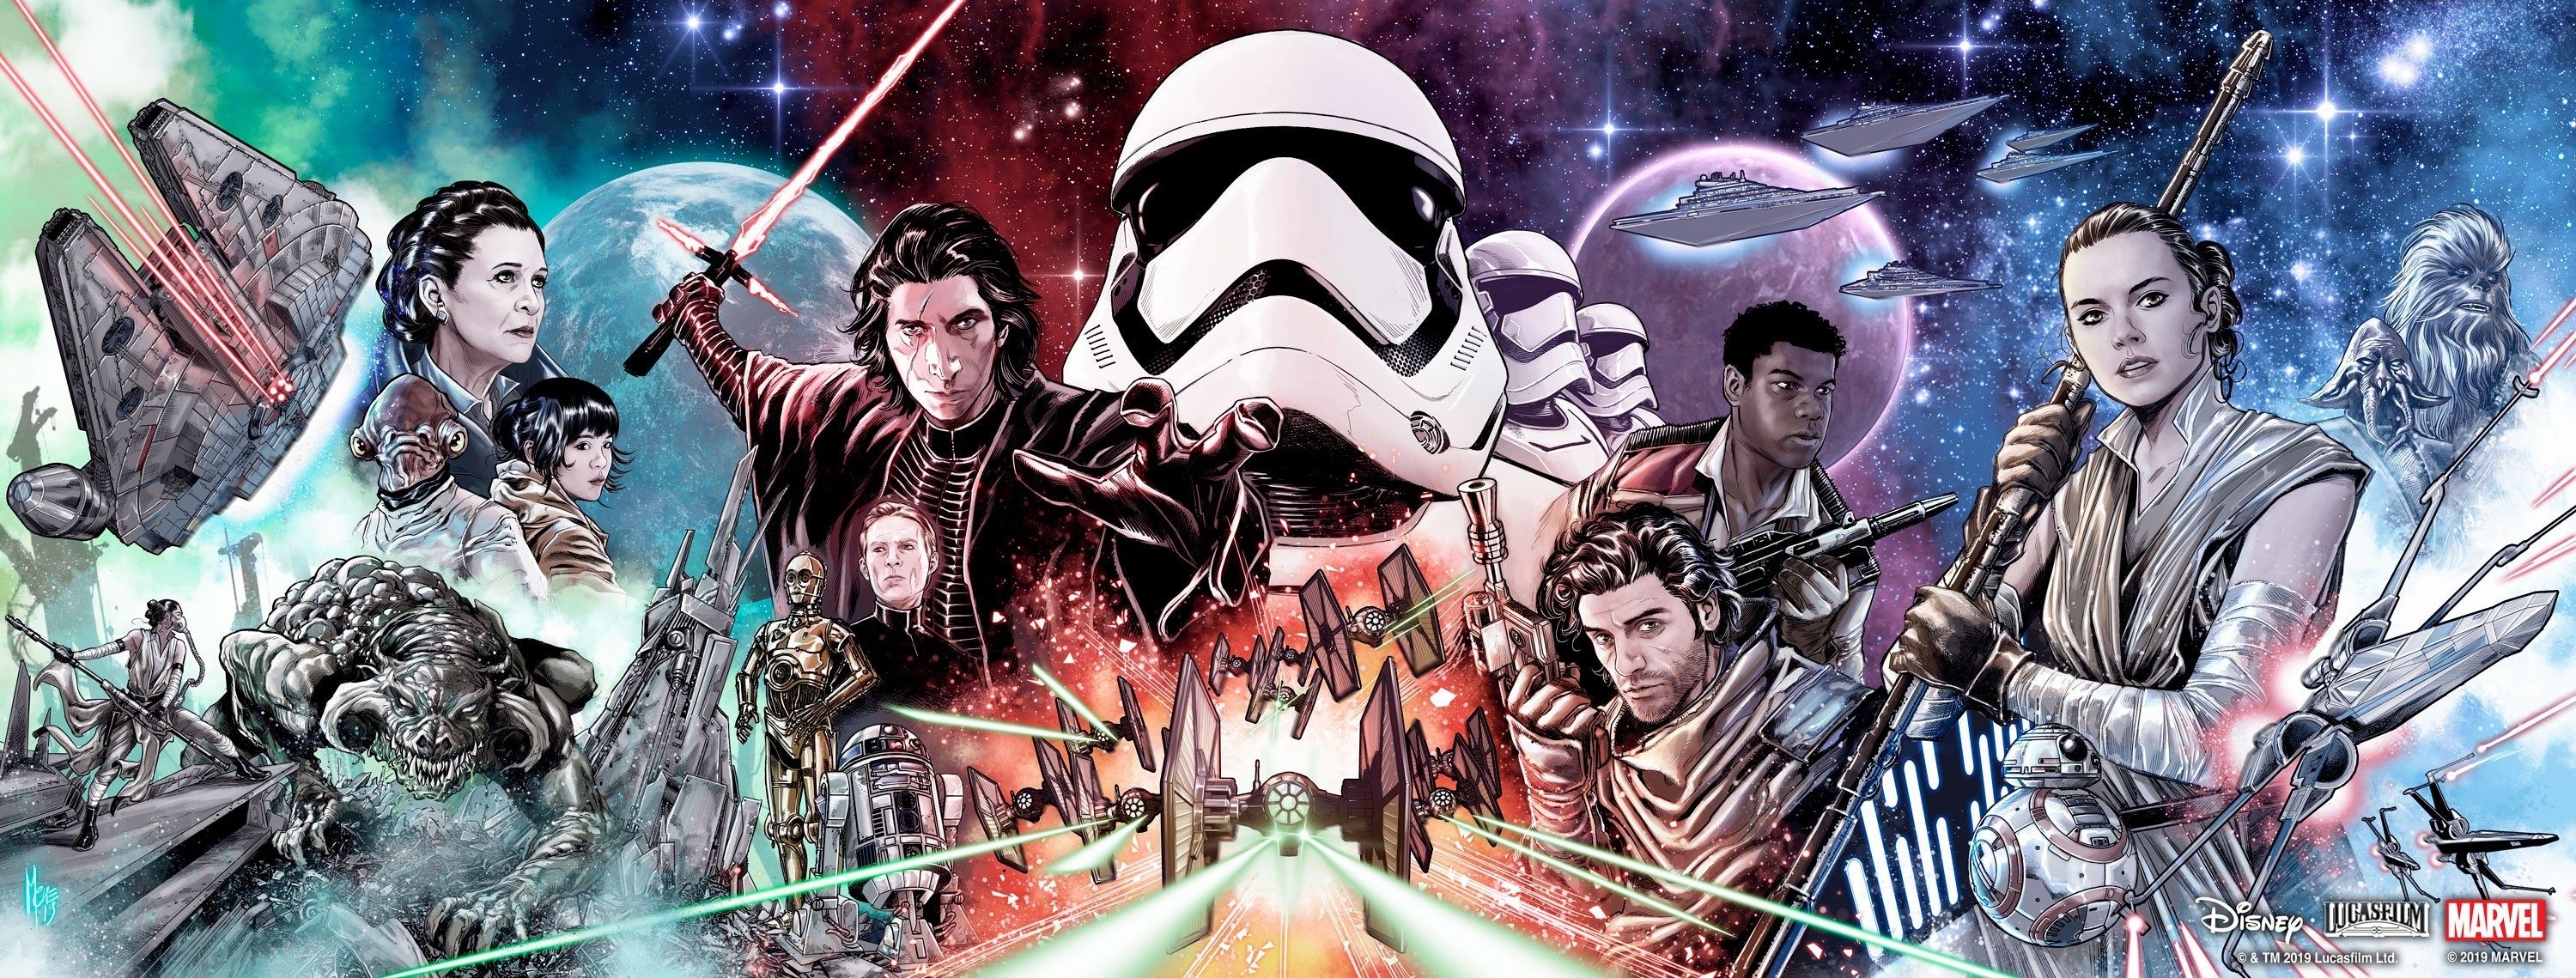 Star Wars All Characters Wallpapers